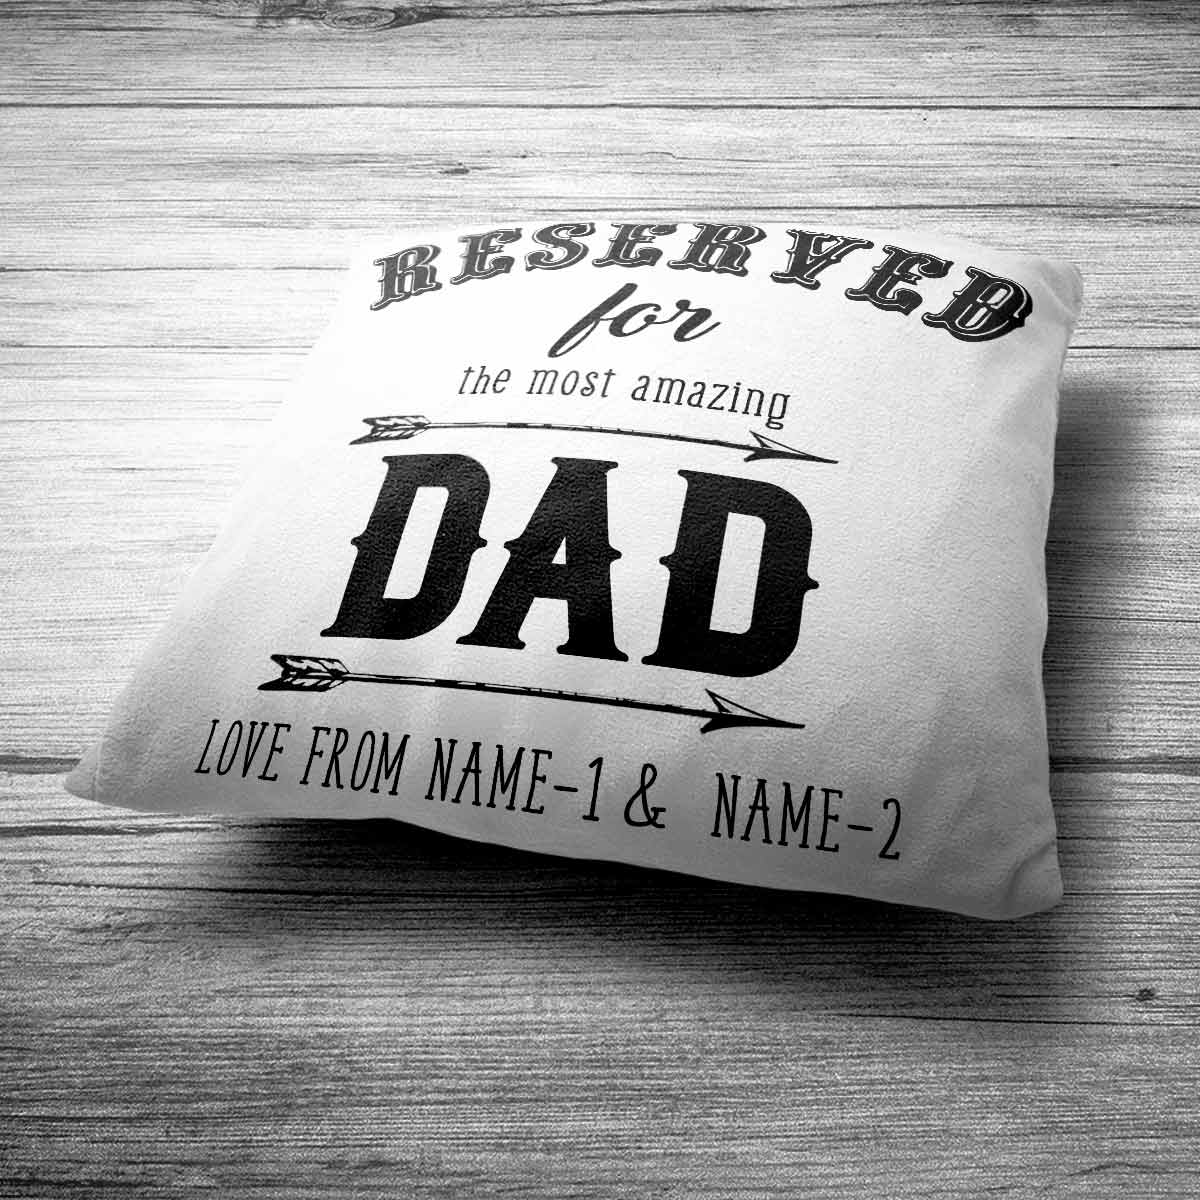 Reserved for Dad Personalised Cushion